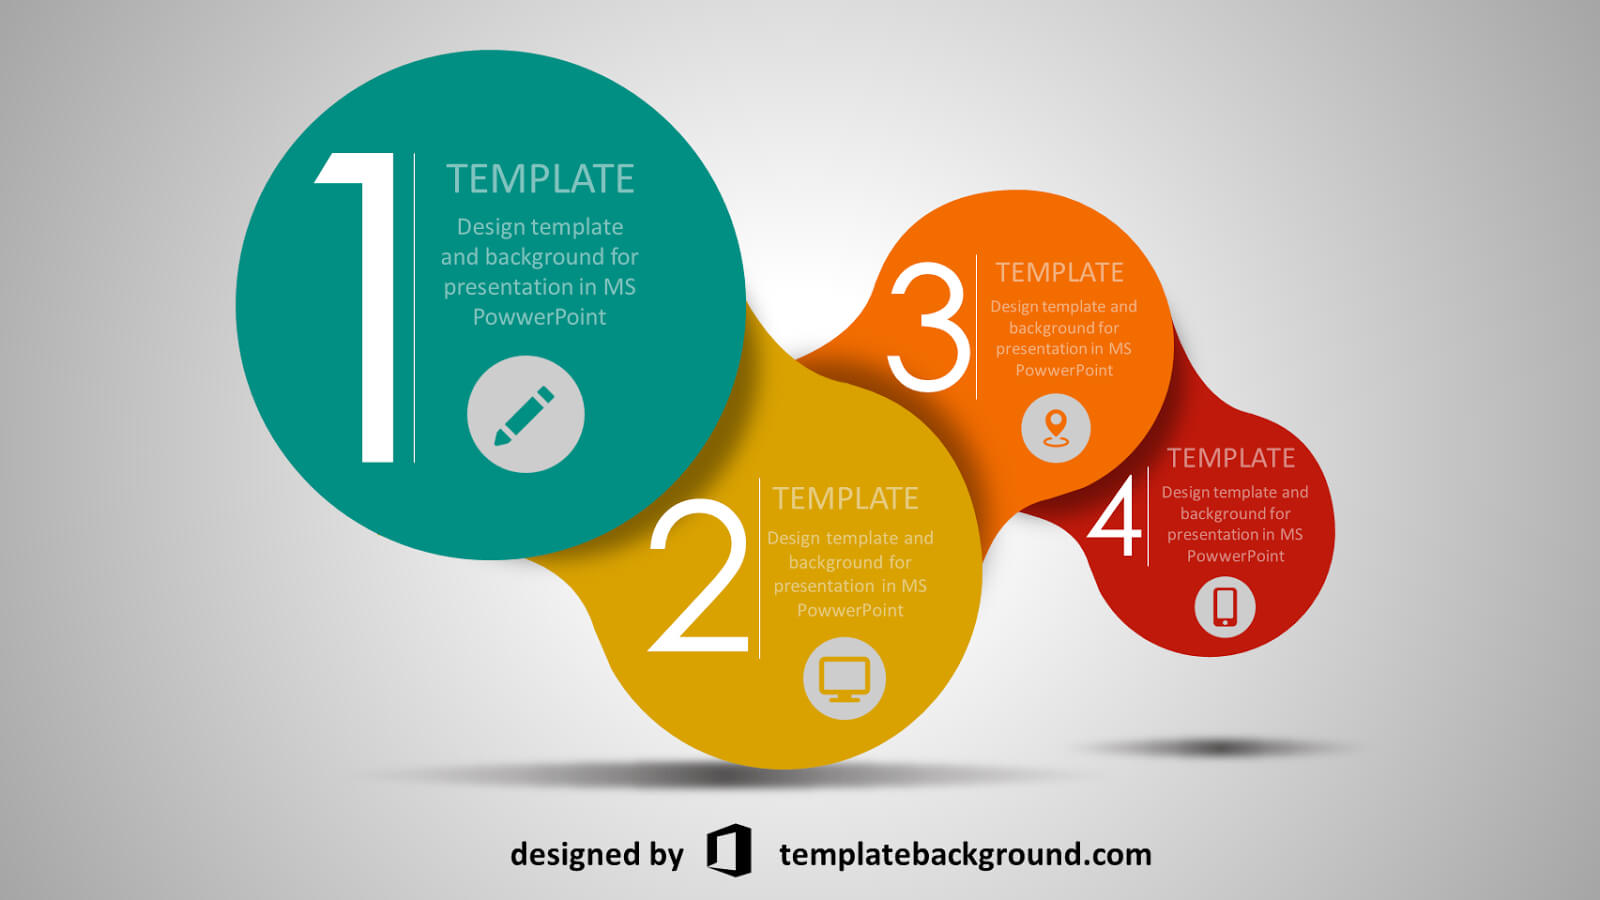 022 Power Point Presentation Template Free Best Ideas Throughout Powerpoint 2007 Template Free Download